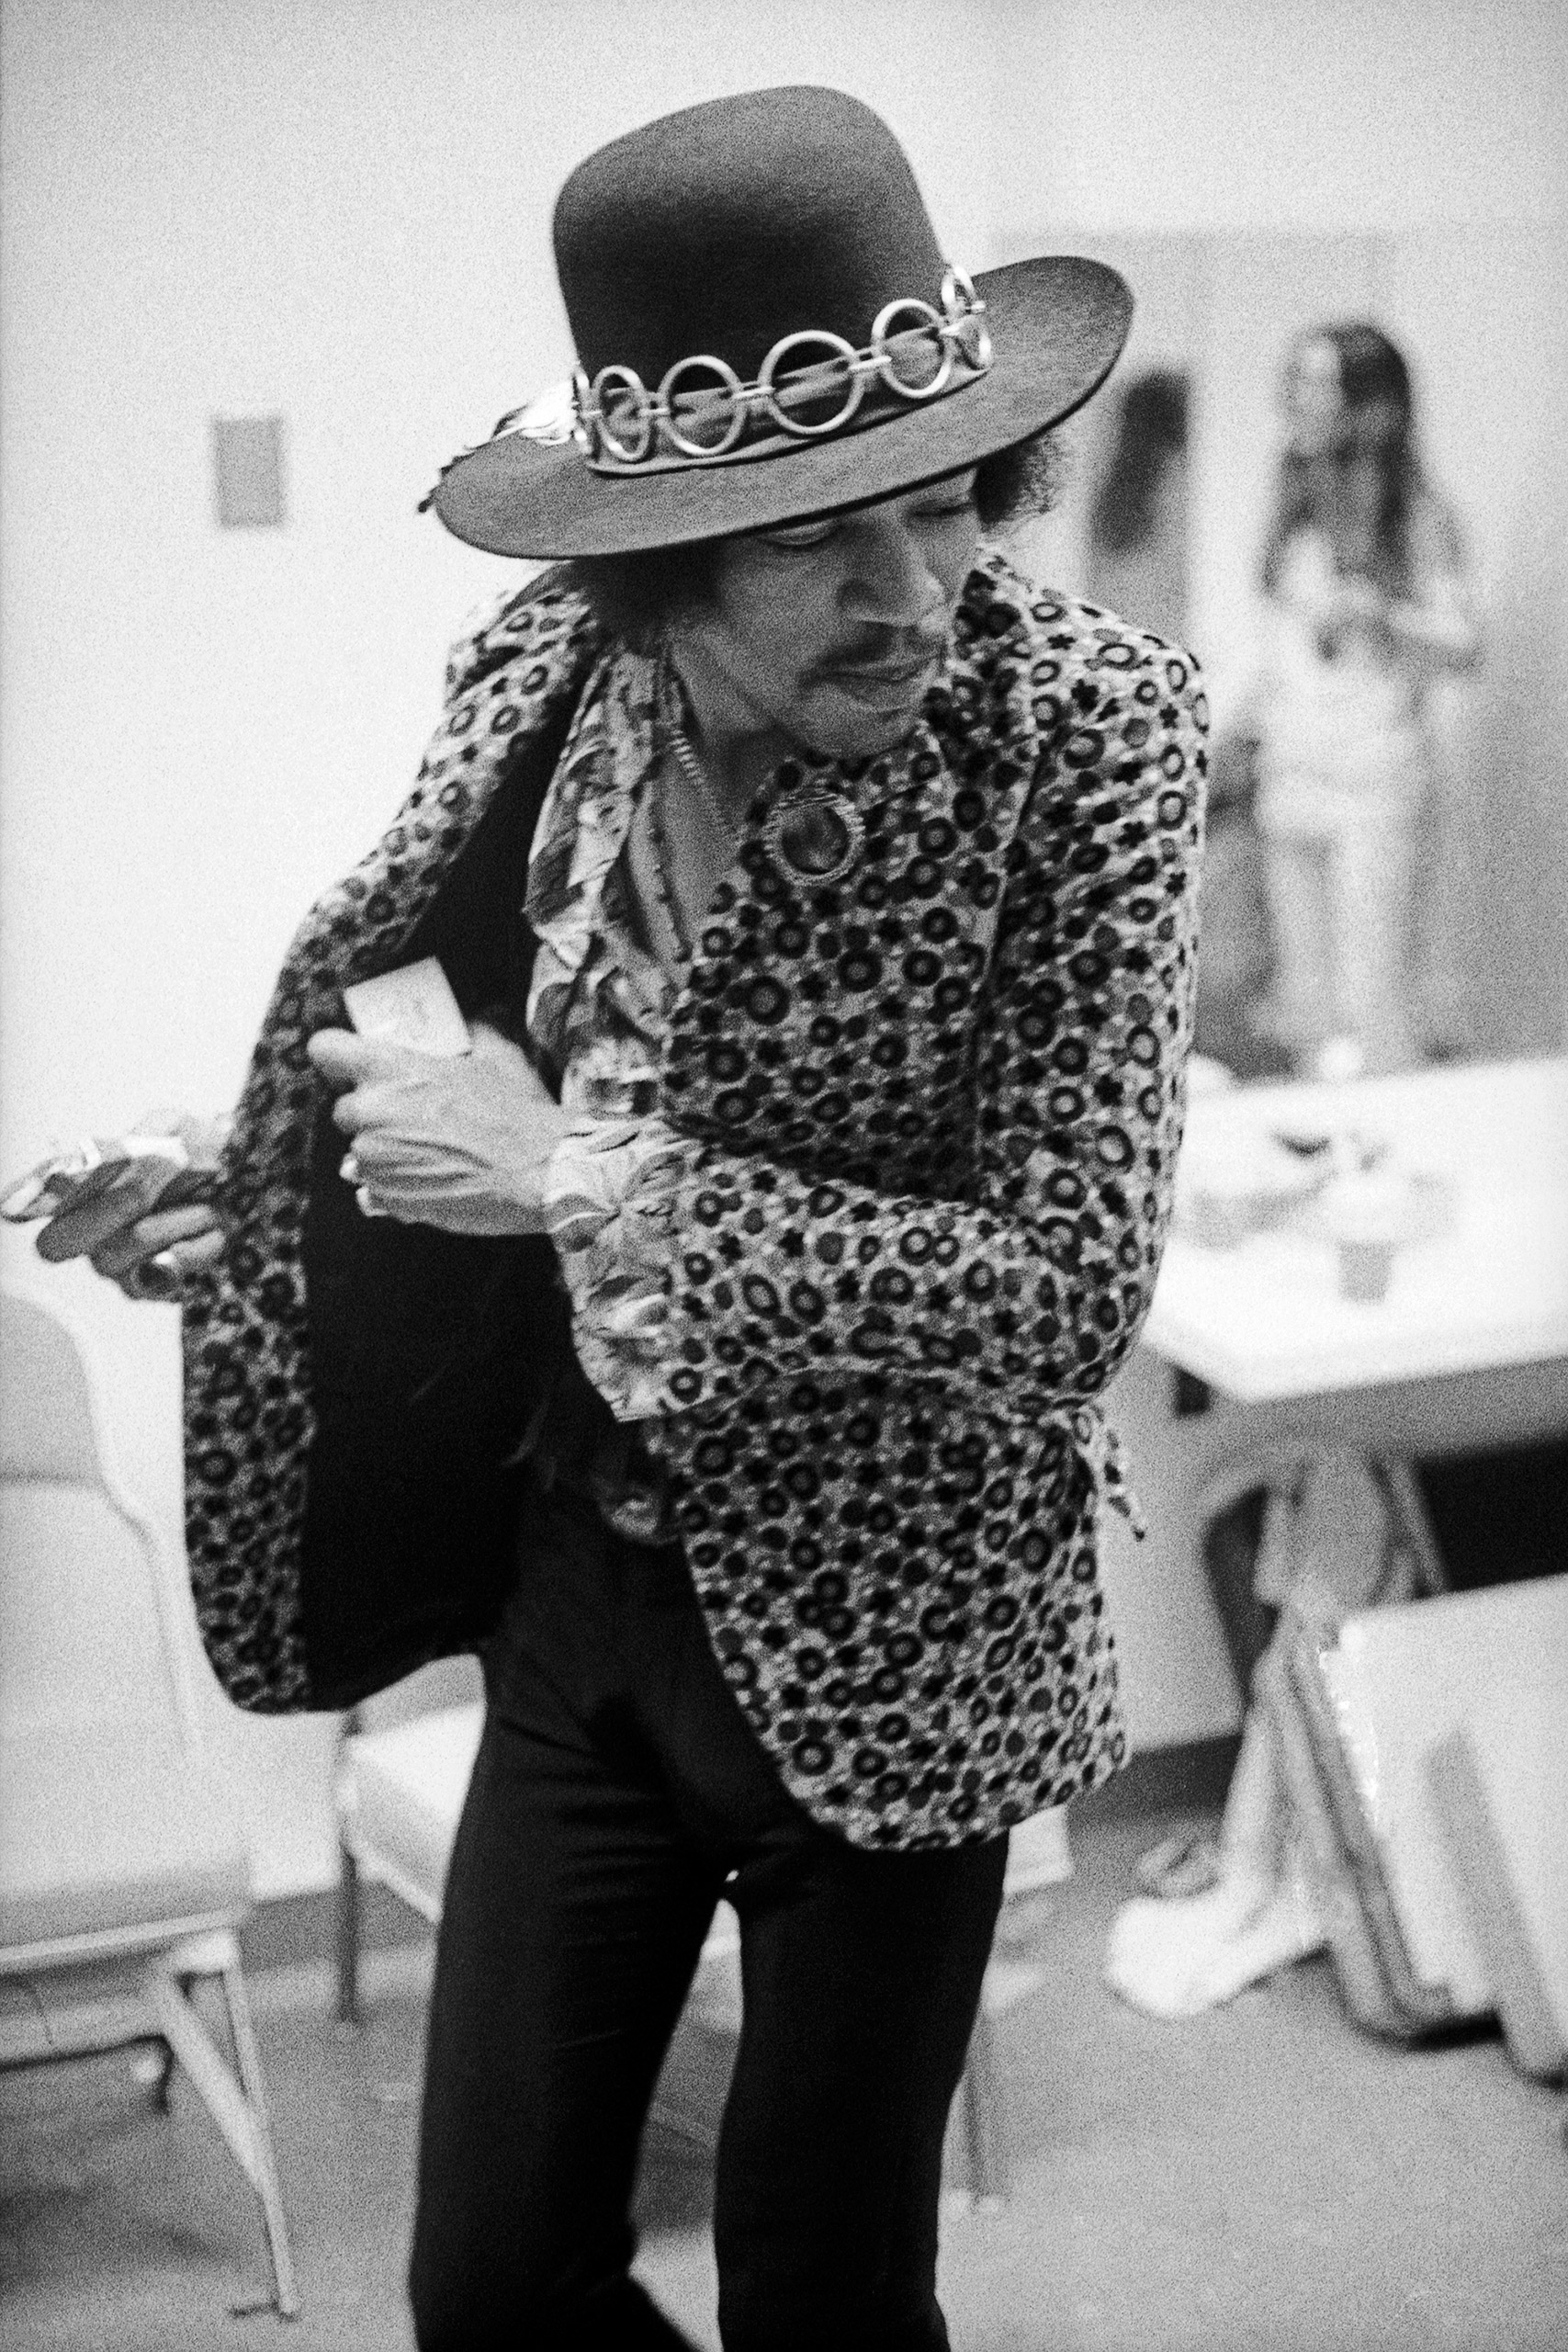 Jimi Hendrix backstage before his show at the Anaheim Convention Center, Anaheim, CA. on Feb. 9, 1968.